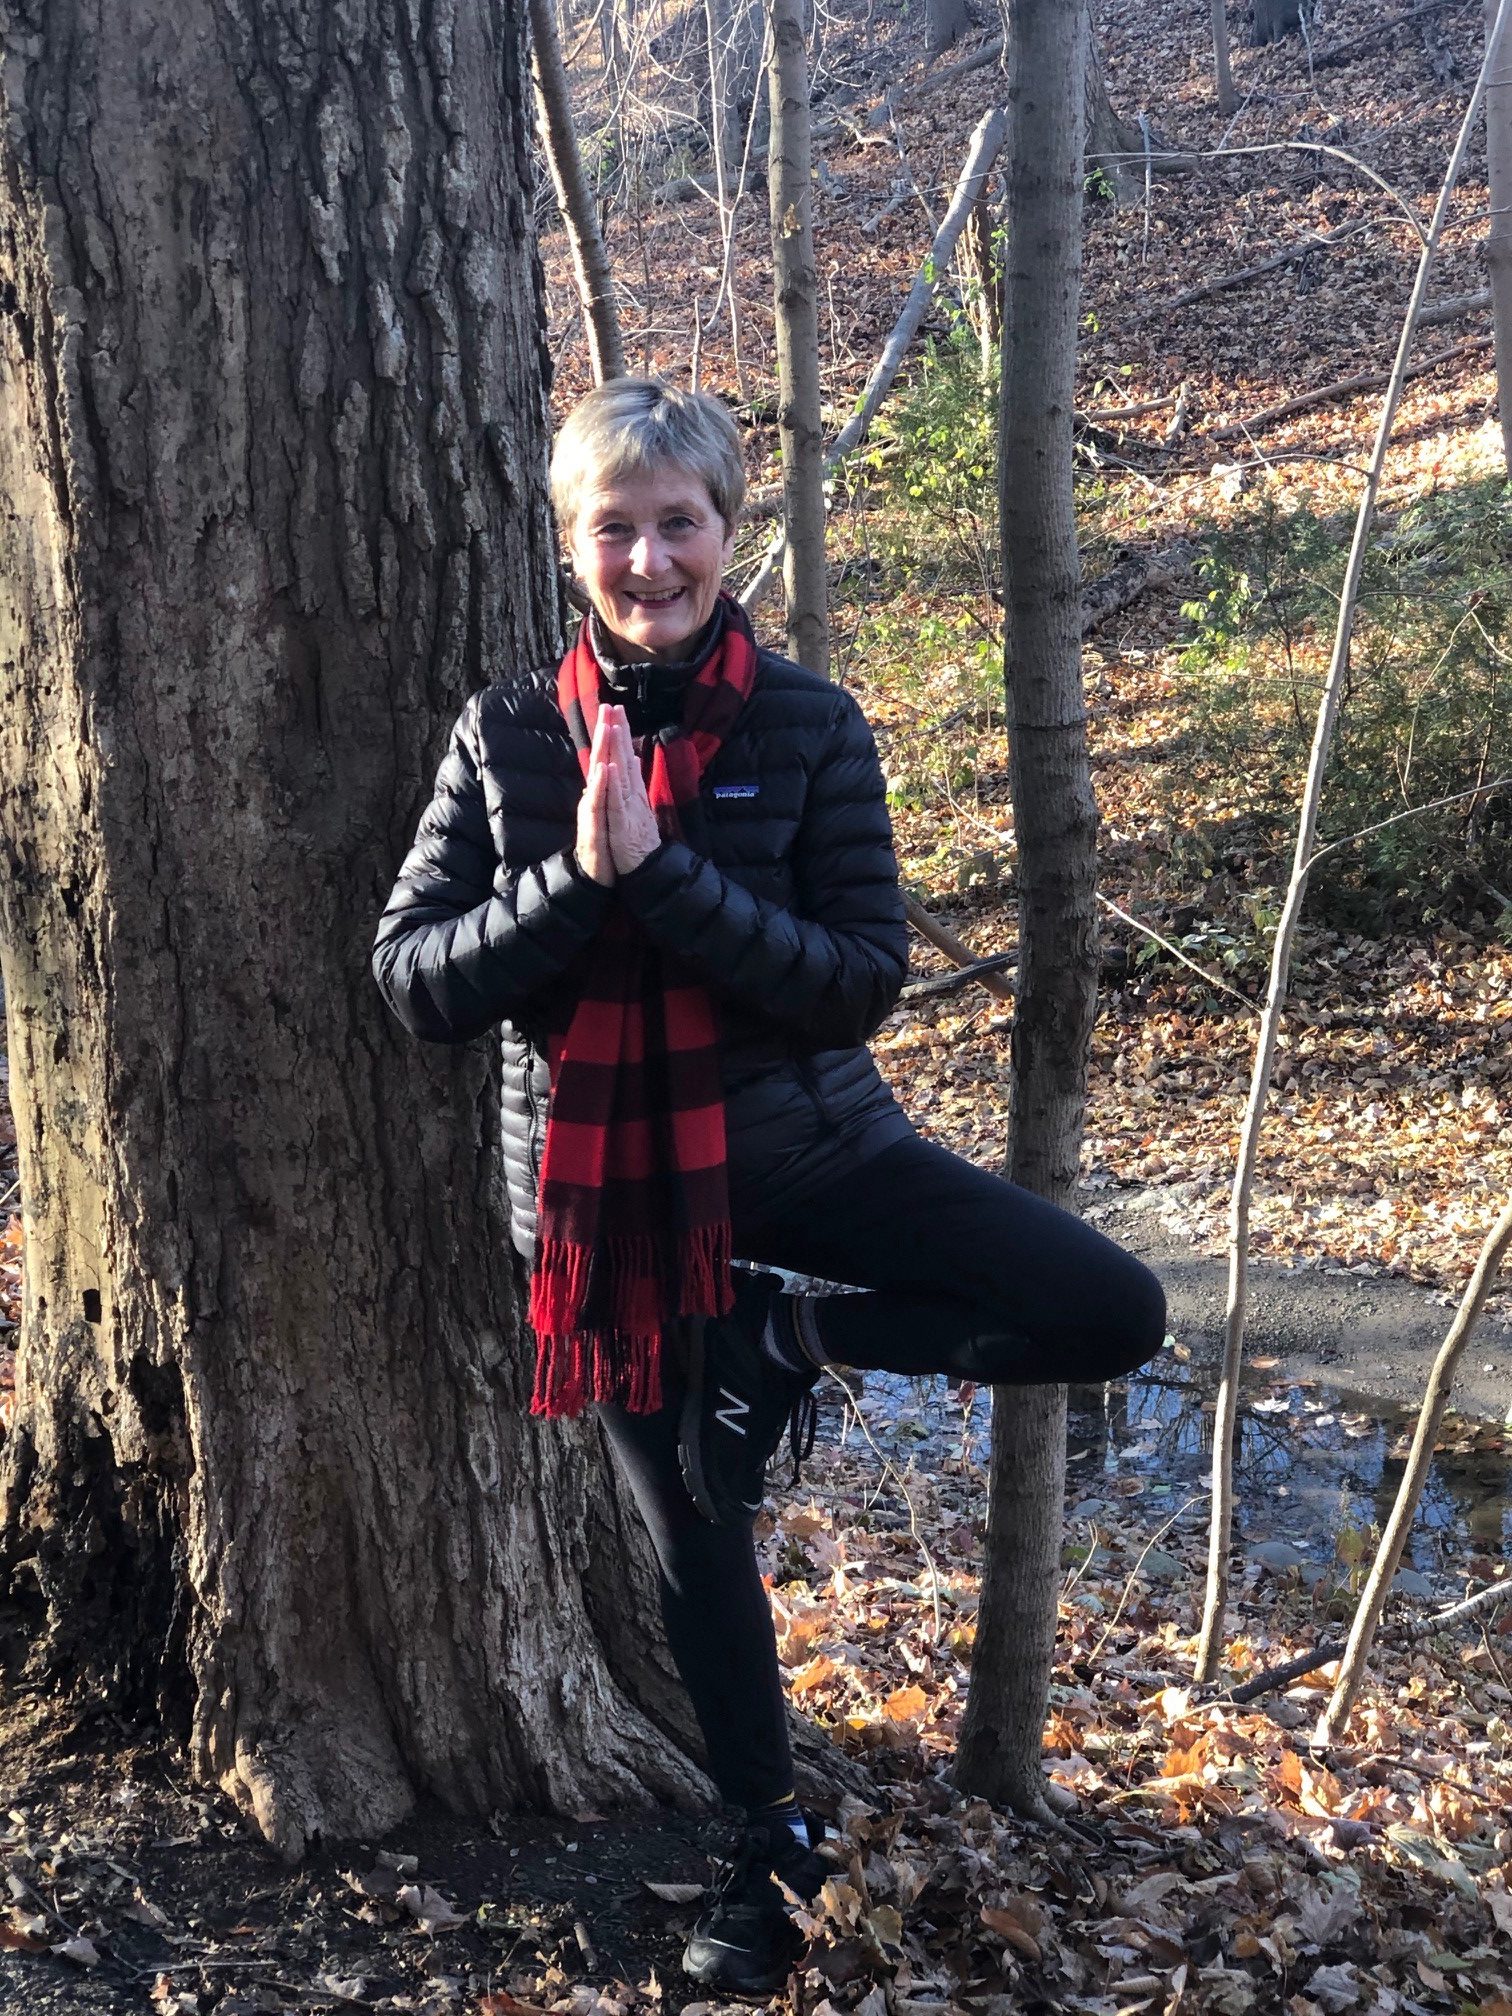 Wendy doing a tree pose in front of a tree